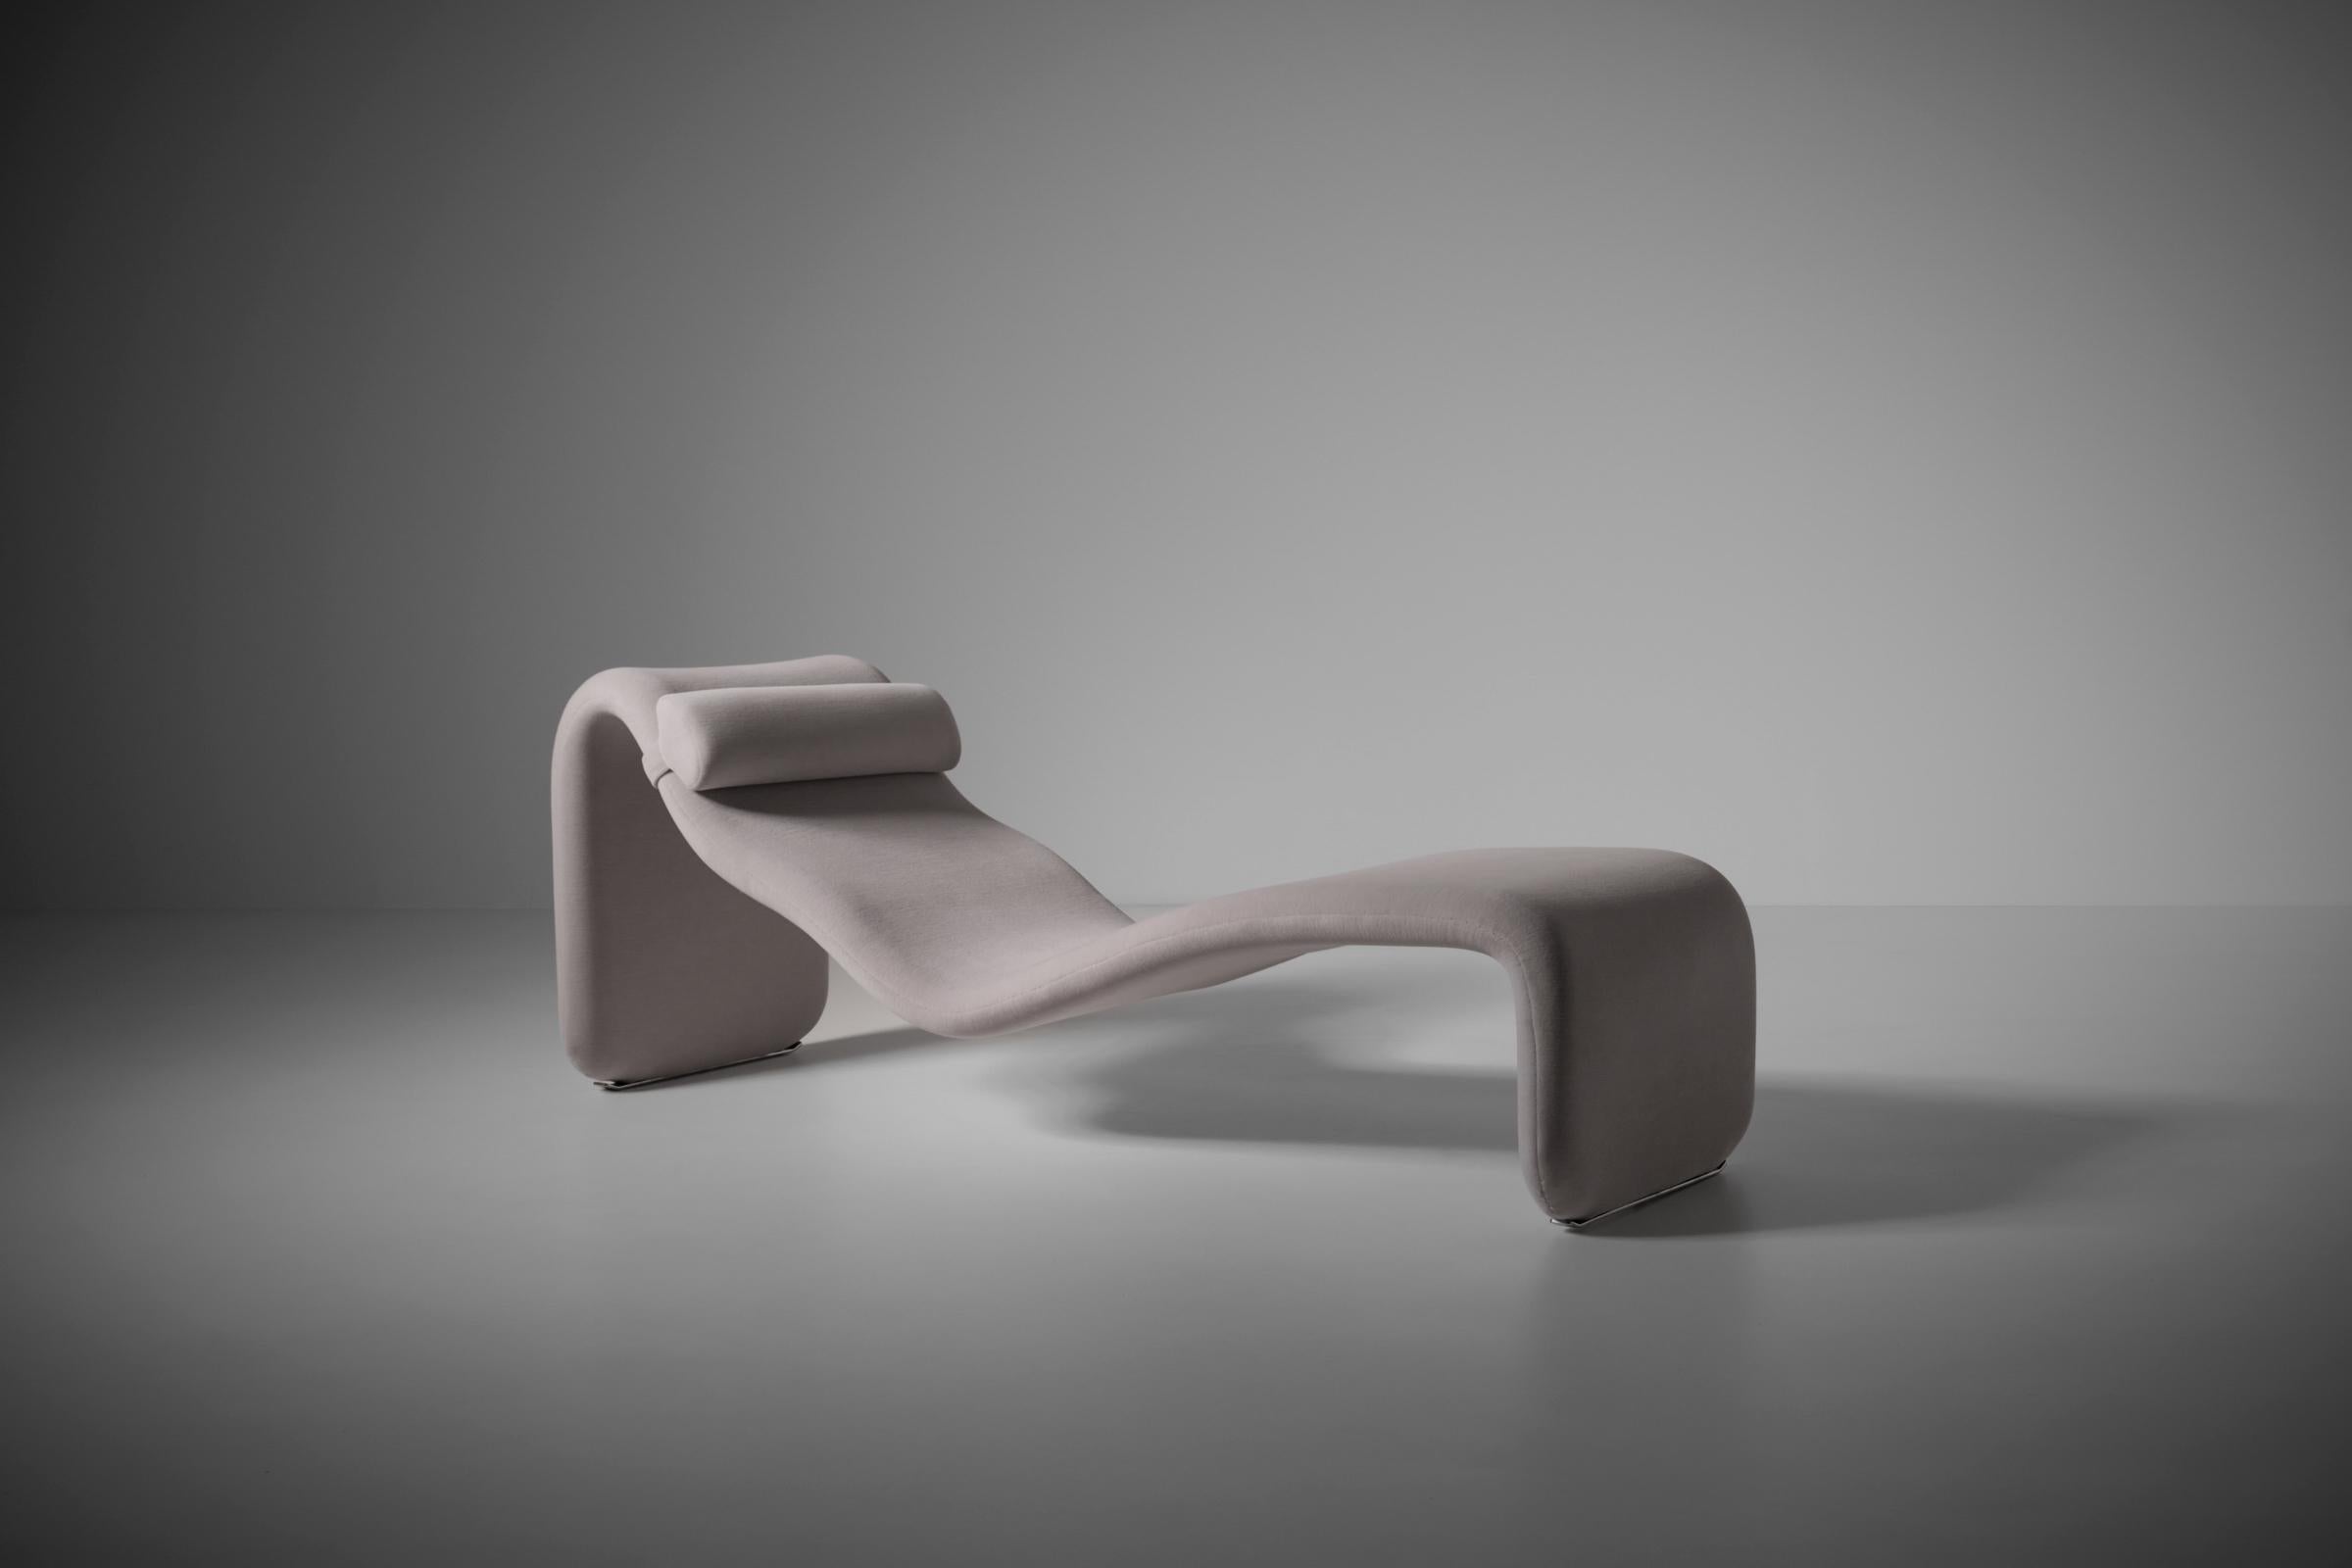 Iconic chaise longue 'Djinn' by Olivier Mourgue for Airborne international, France 1964-1965. Mourgue takes a very important place in the world of modern French design. The chair is well known for its appearance in Stanley Kubrick’s 2001: A Space